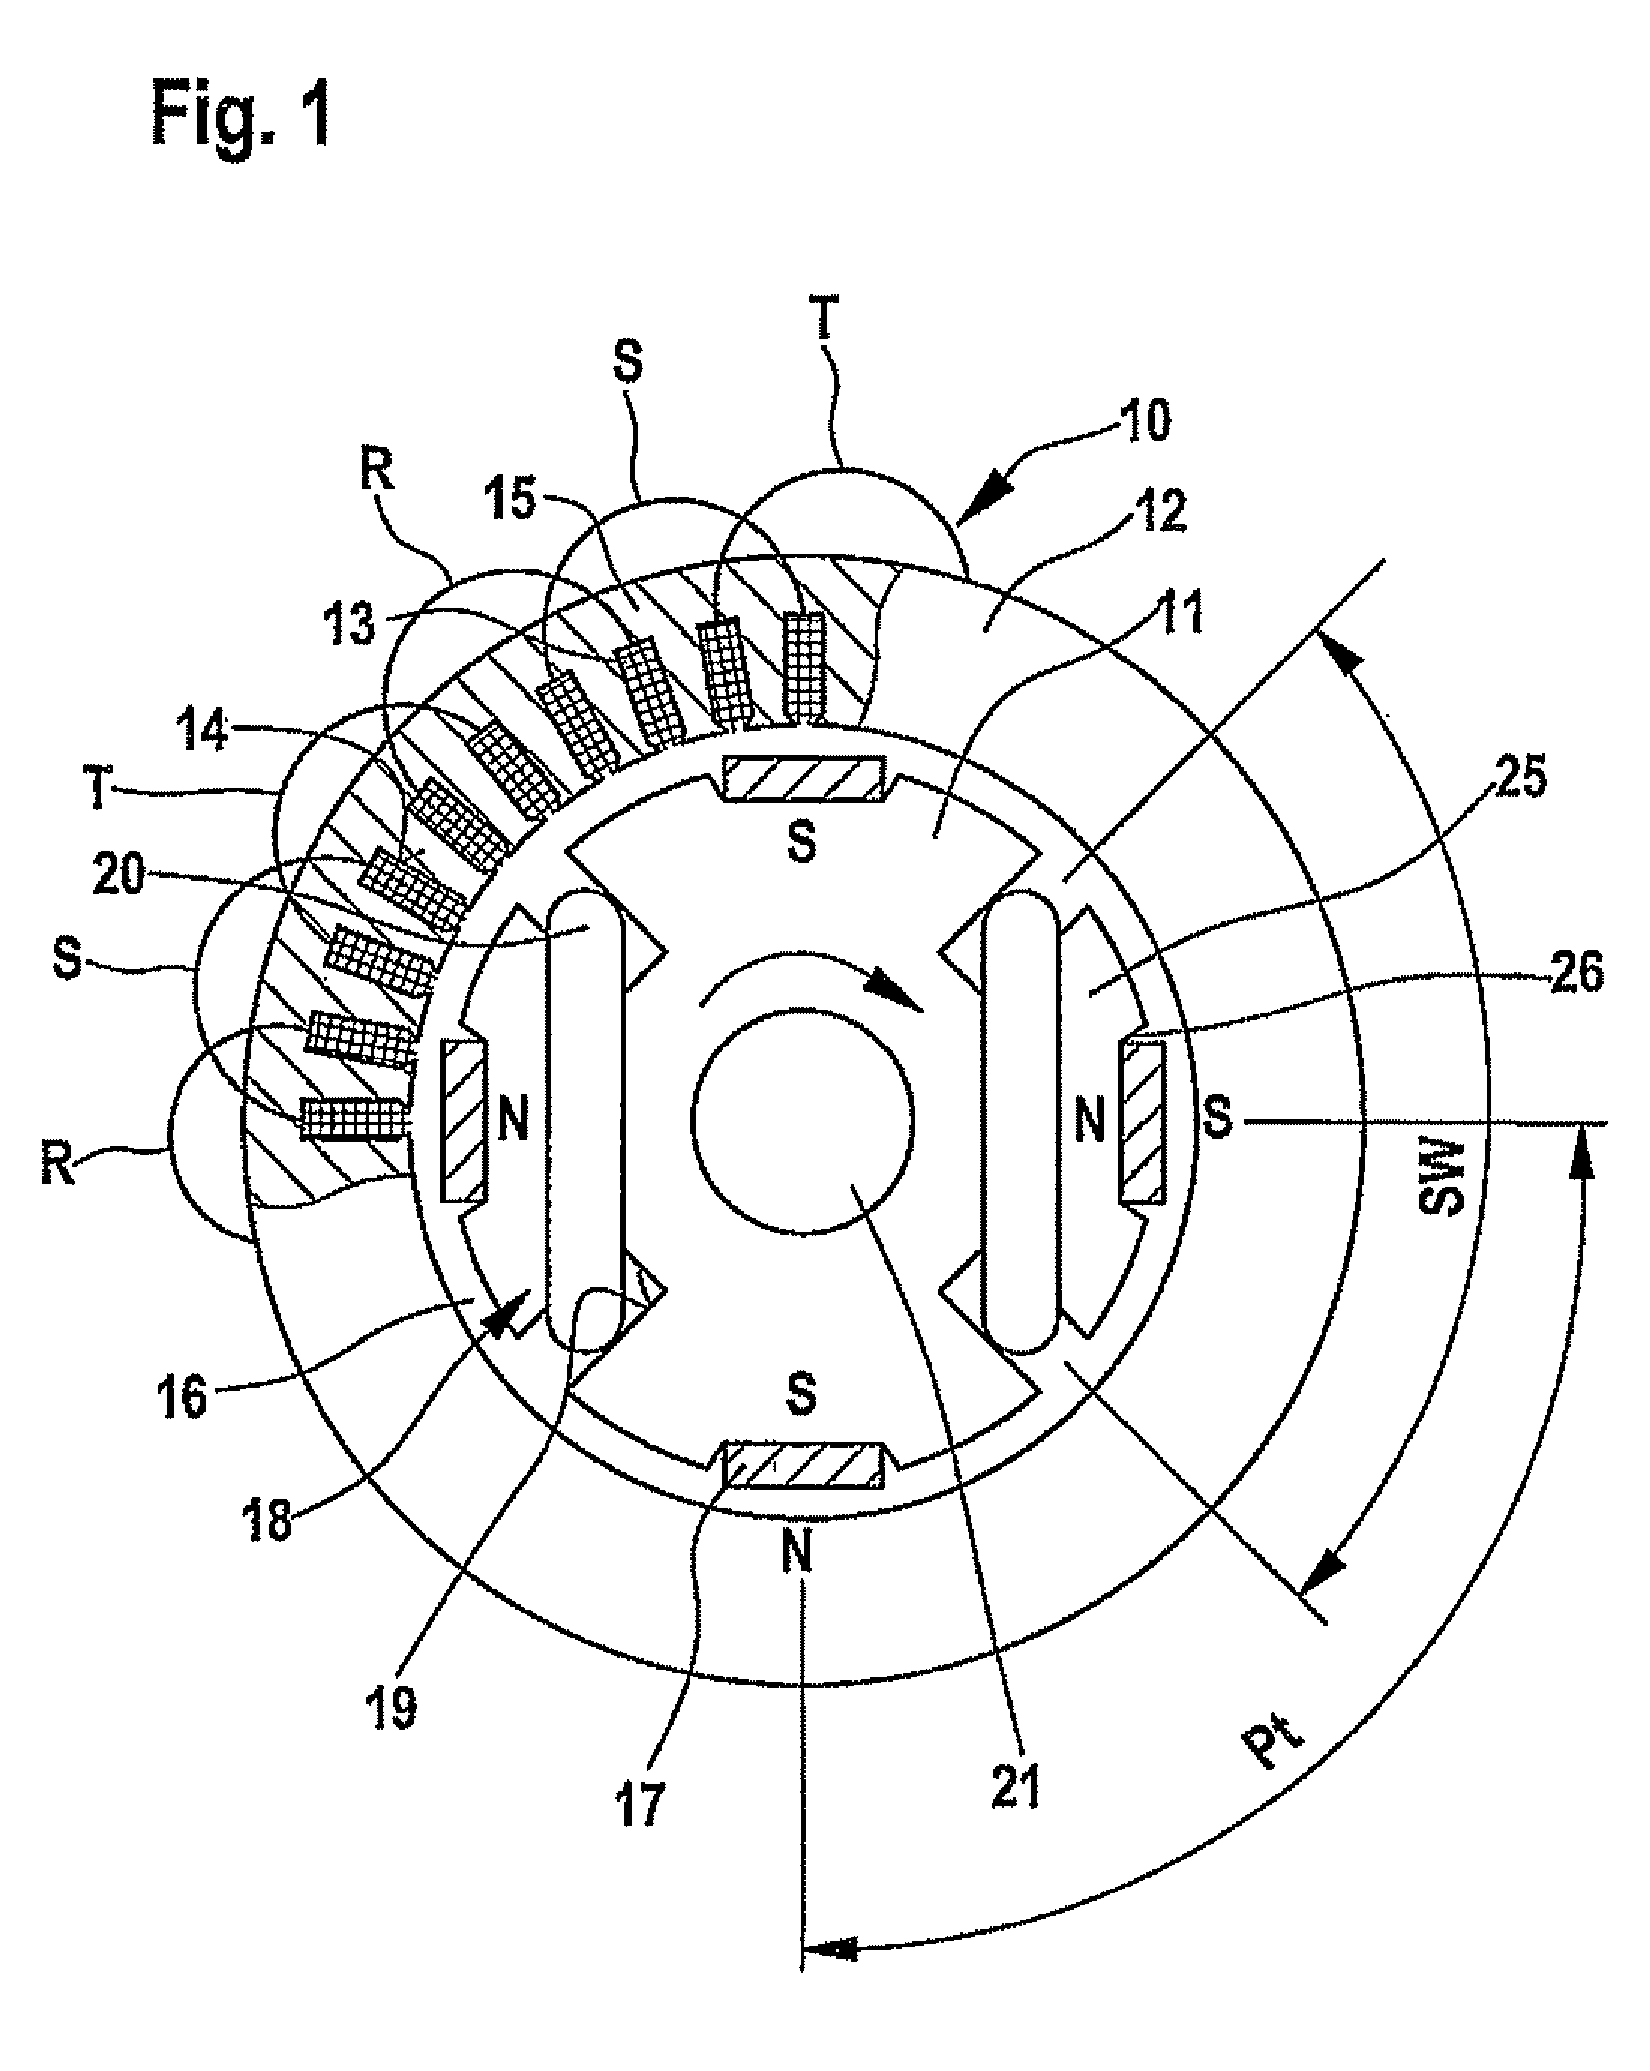 Electric machine having a hybrid-excited rotor